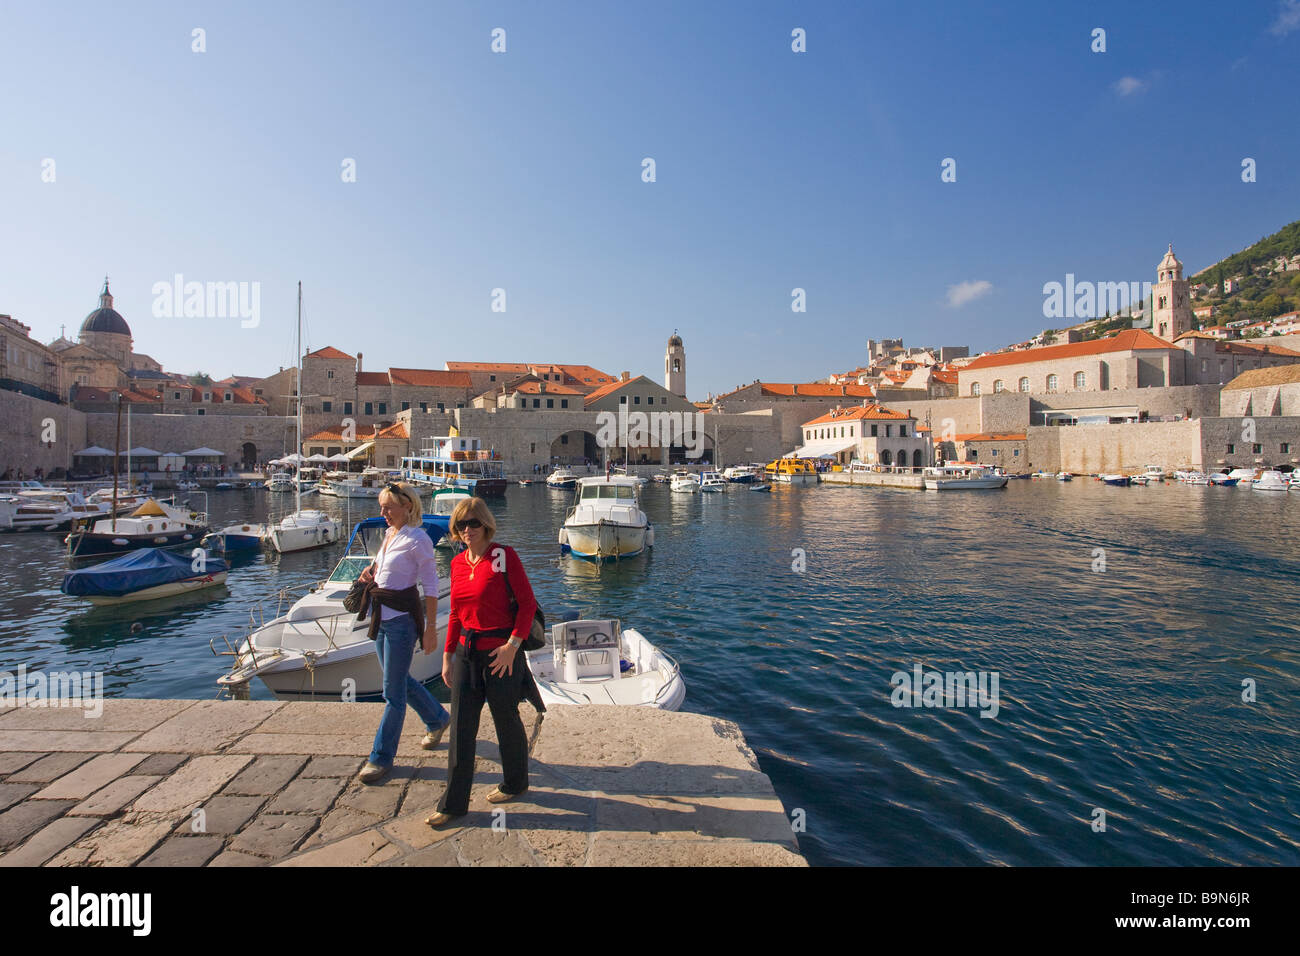 Two women visit old harbour in walled city of Dubrovnik in summer sunshine Dalmatian Coast Croatia Europe Stock Photo